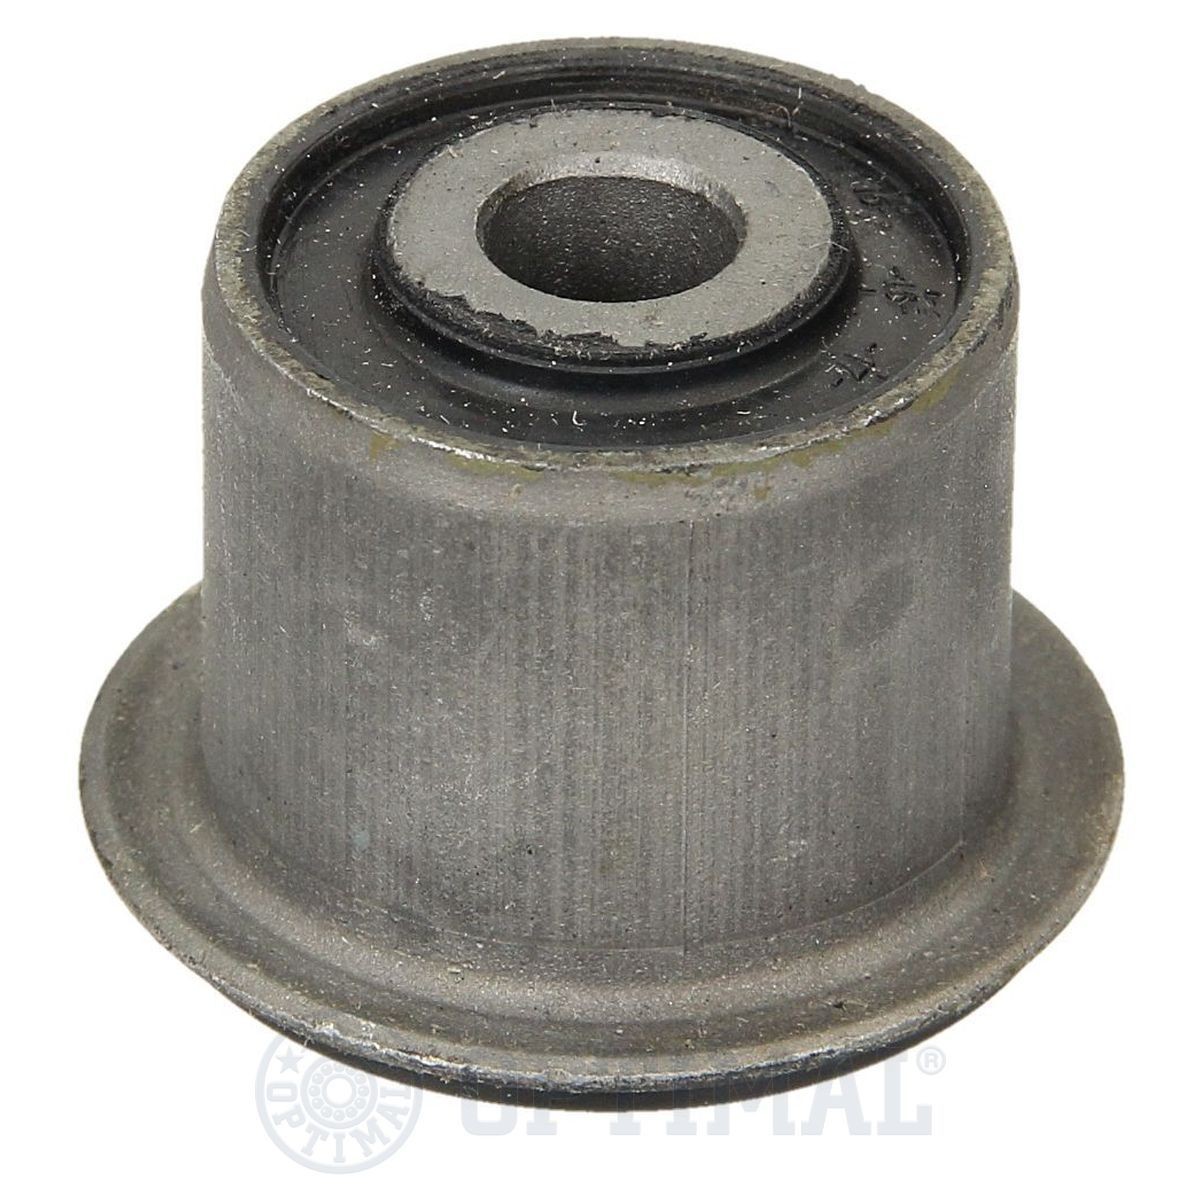 F8-6730 Suspension Bushes F8-6730 OPTIMAL Front Axle, both sides, Rubber-Metal Mount, for control arm